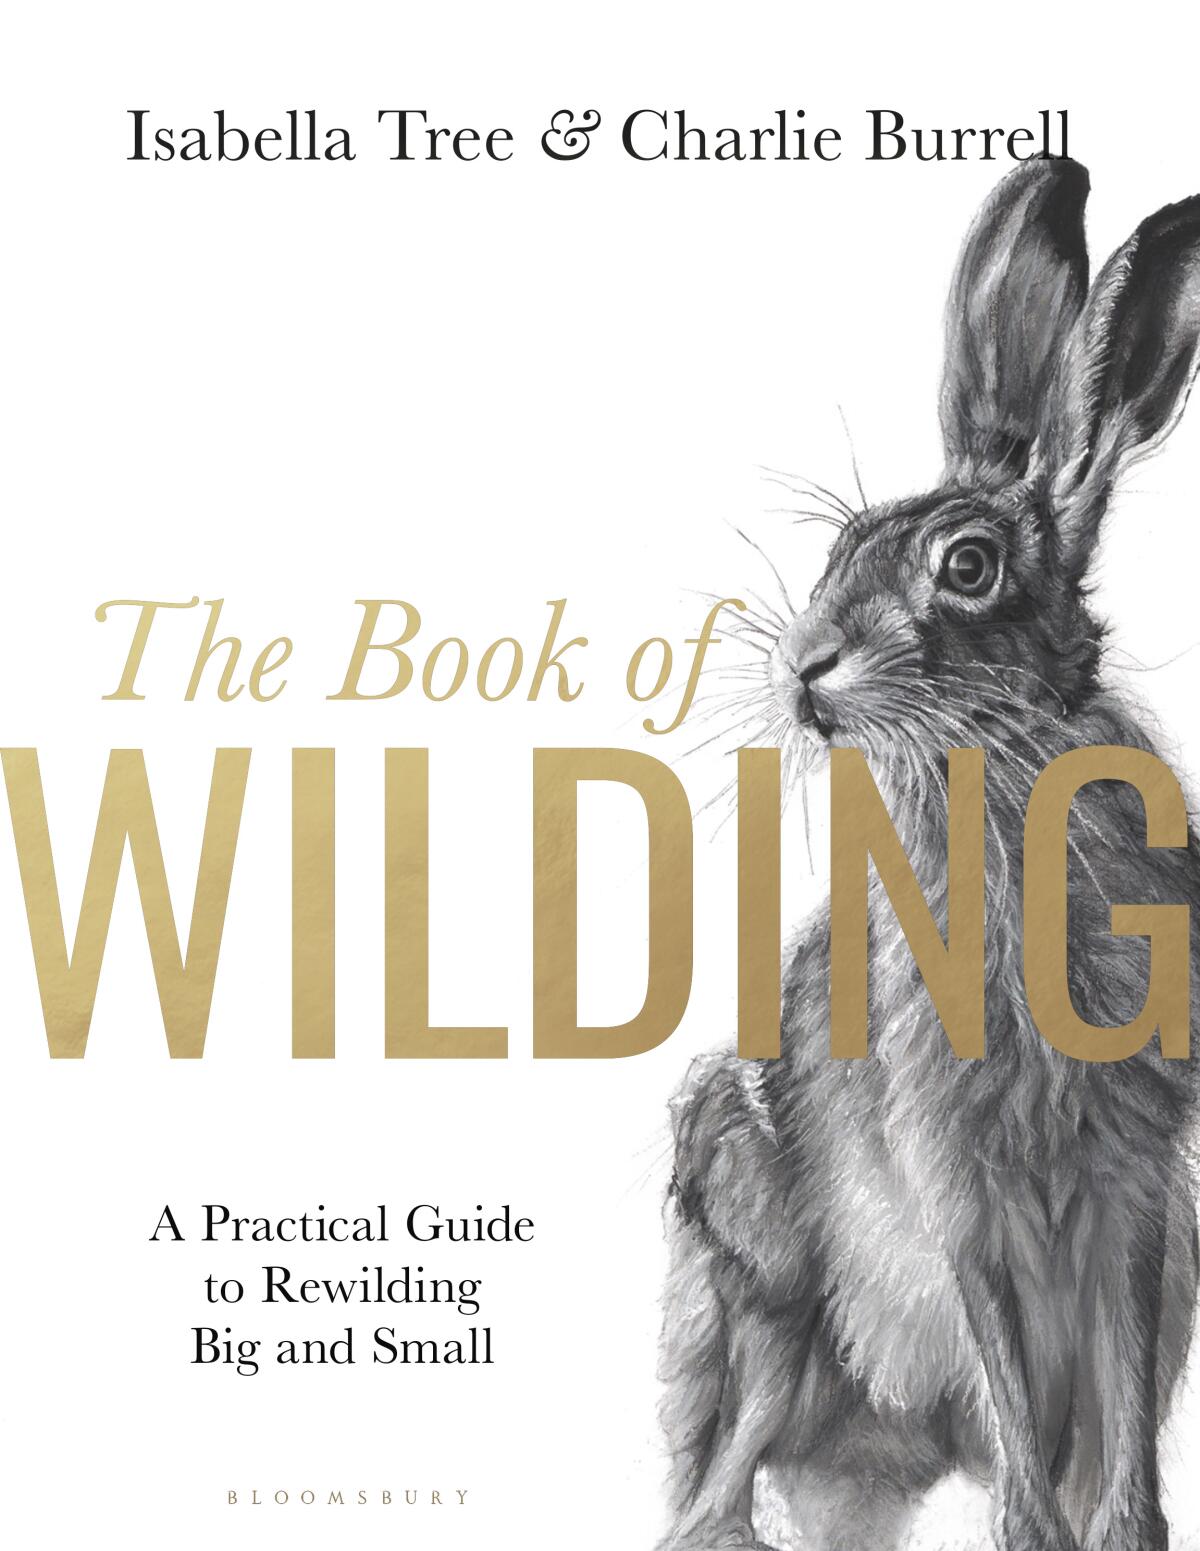 "The Book of Wilding" by Isabella Tree and Charlie Burrell.